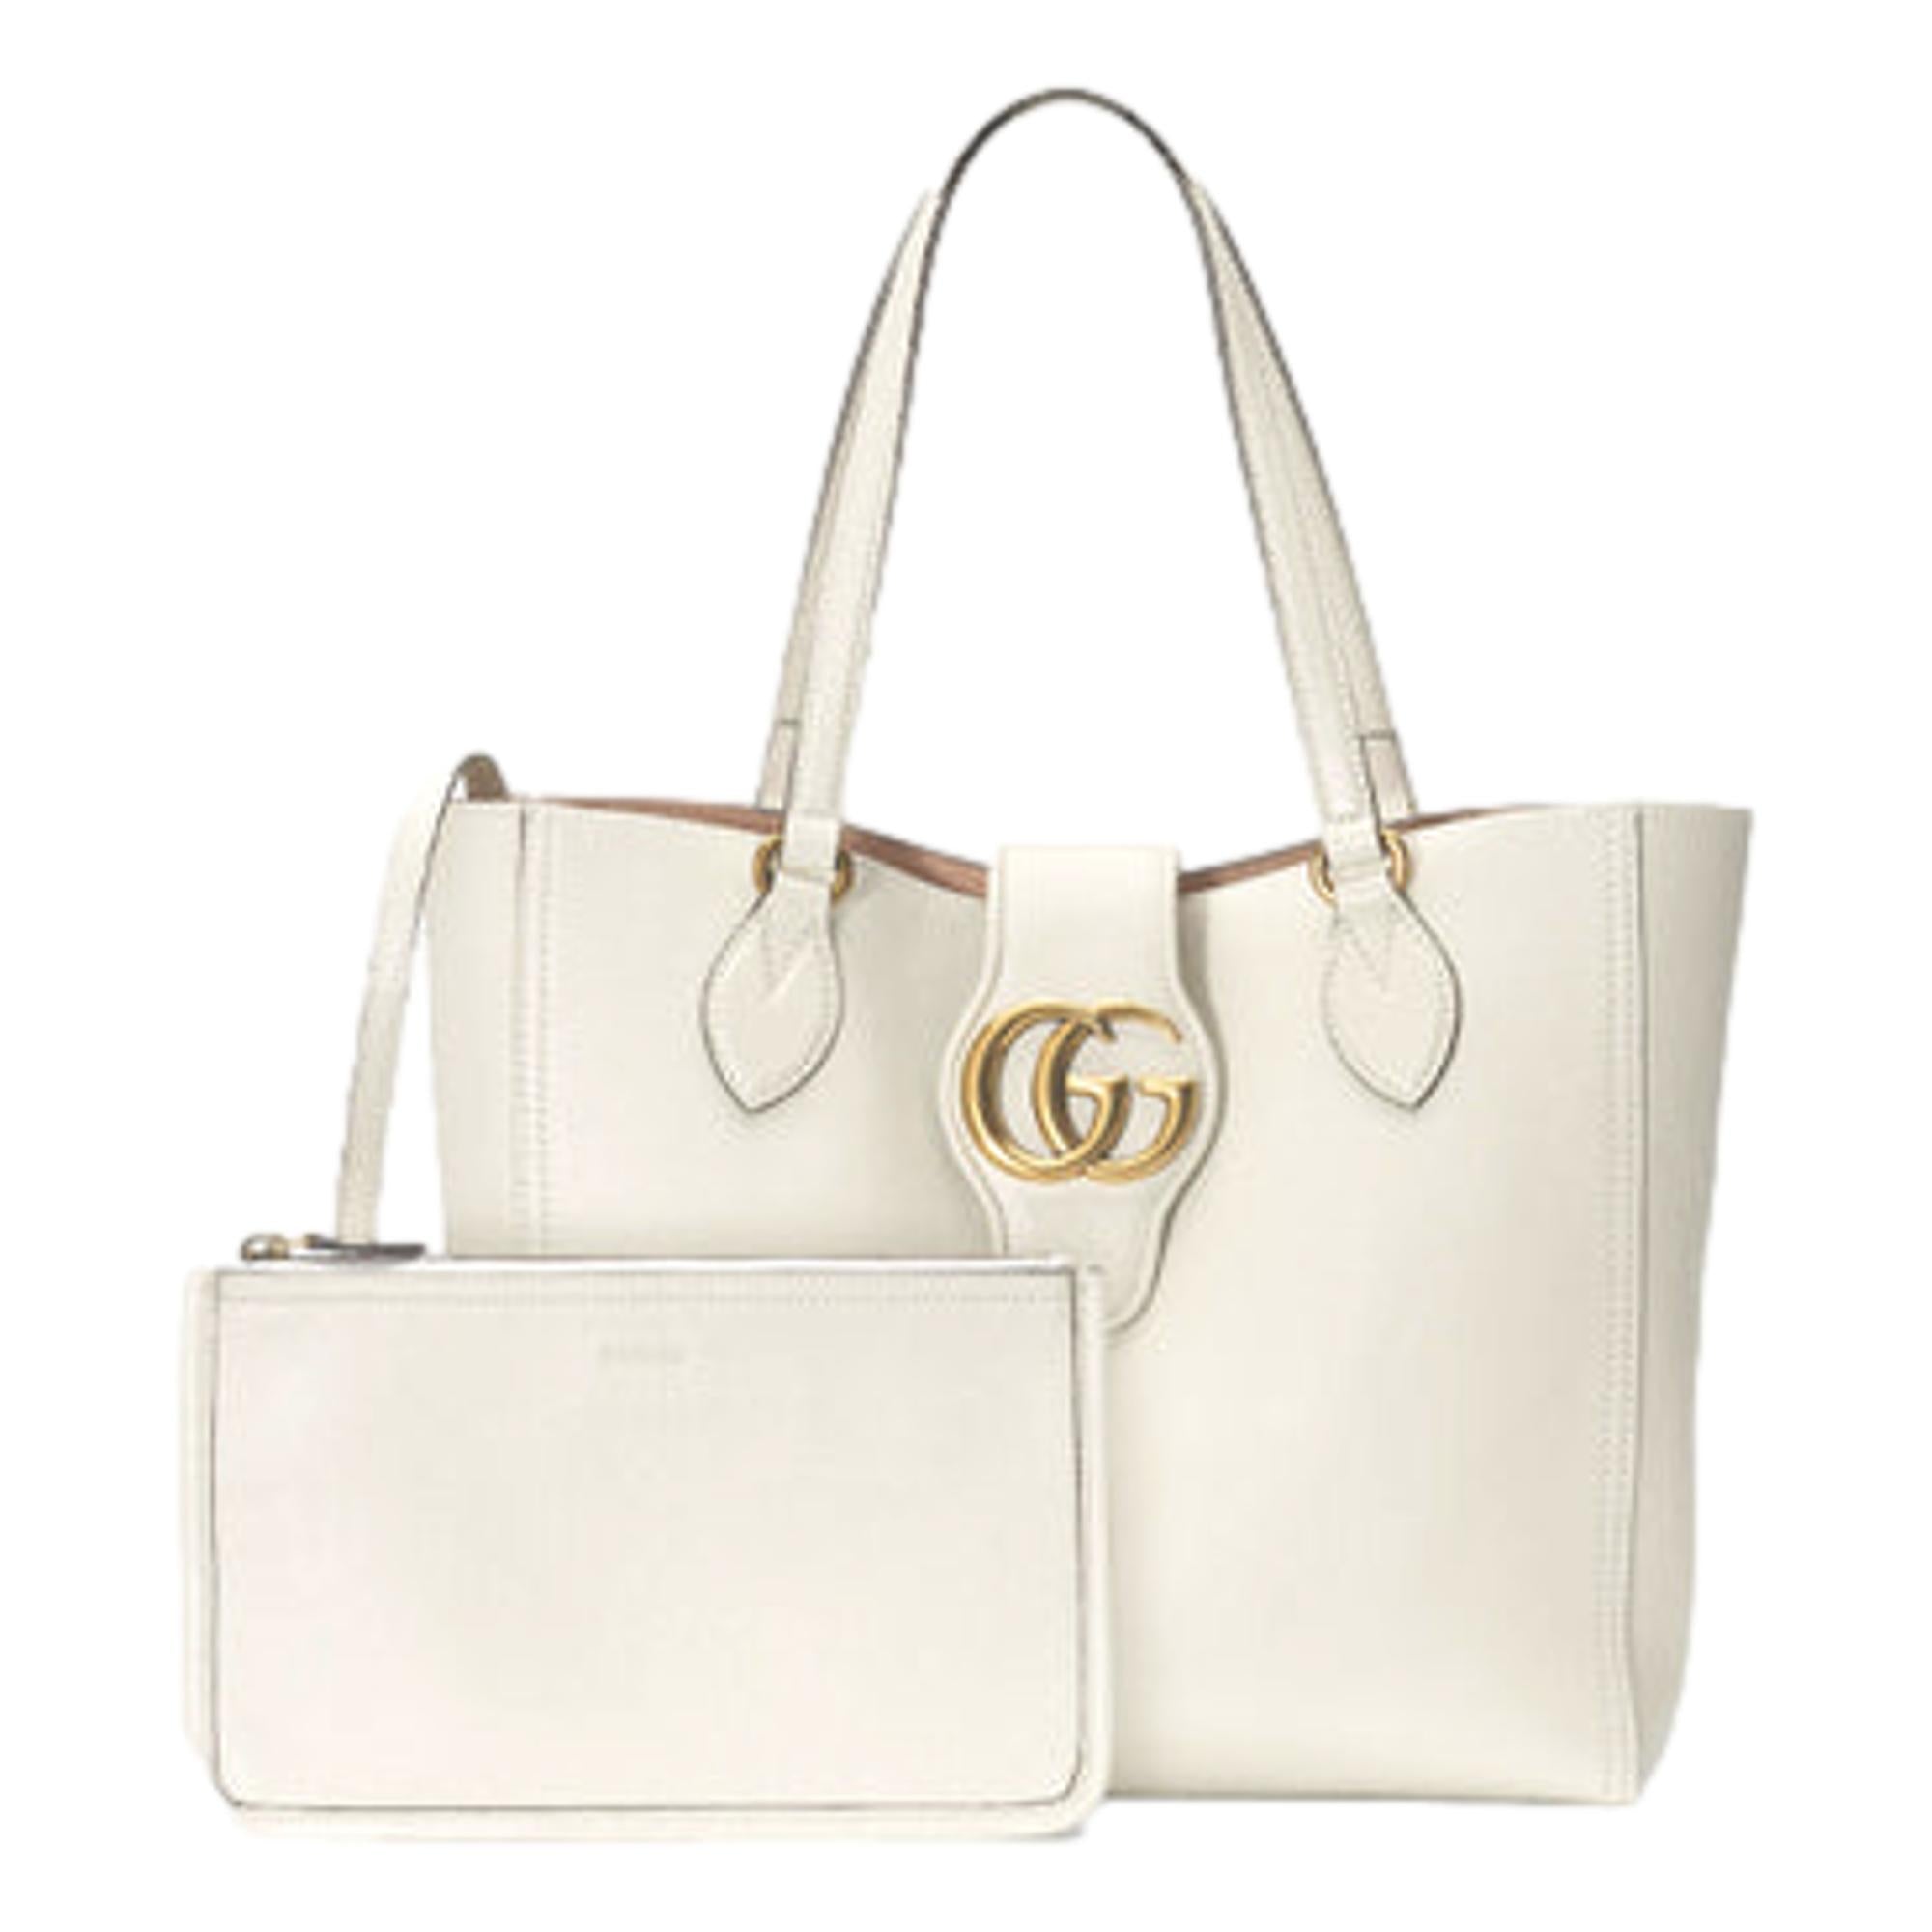 Gucci Dahlia Marmont White Handbag at_Queen_Bee_of_Beverly_Hills